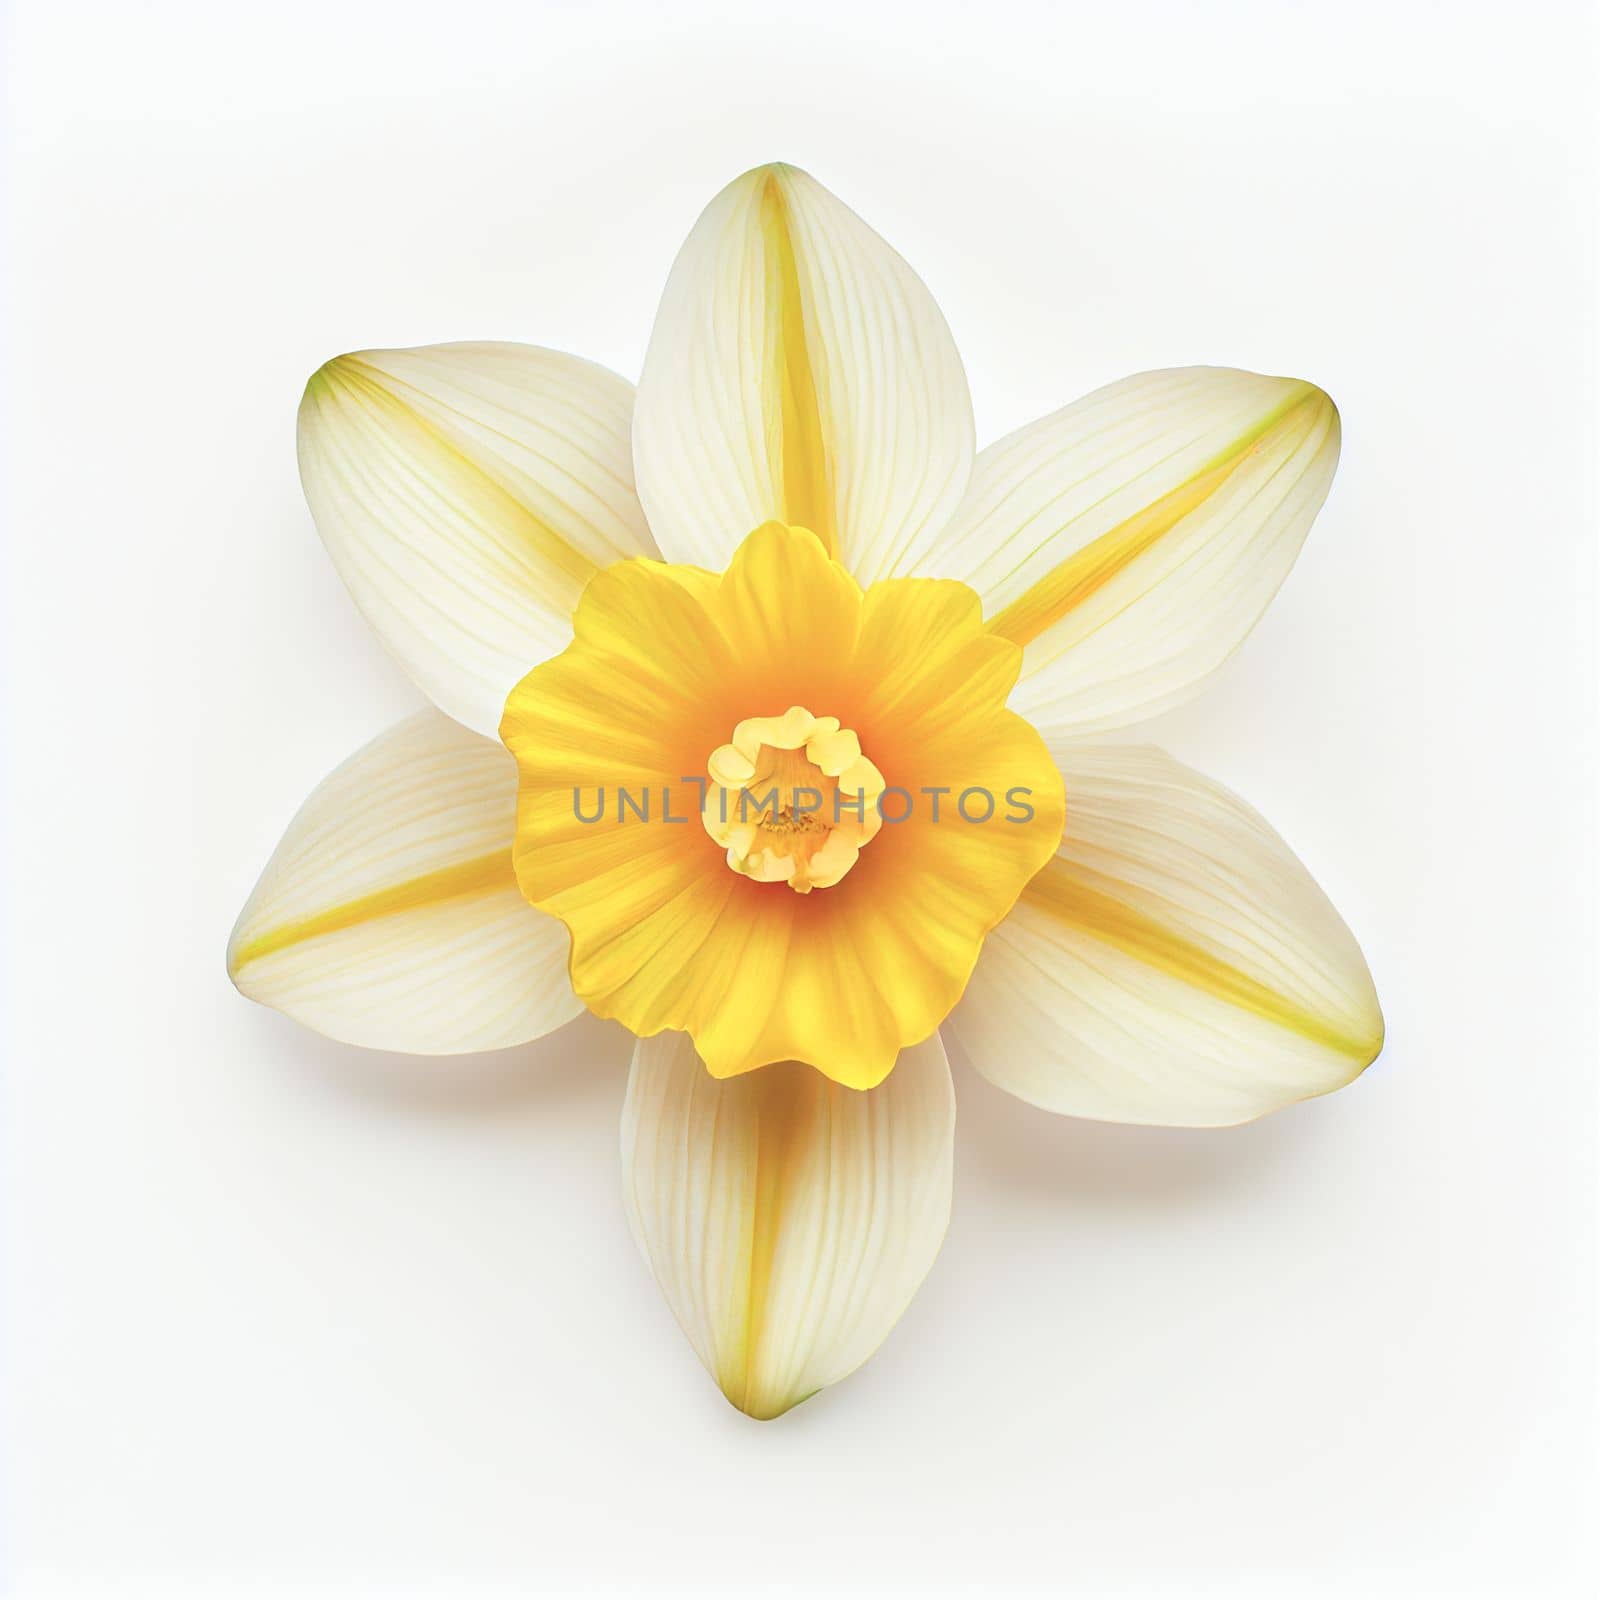 Top view a Daffodil flower isolated on a white background, suitable for use on Valentine's Day cards, love letters, or springtime designs.